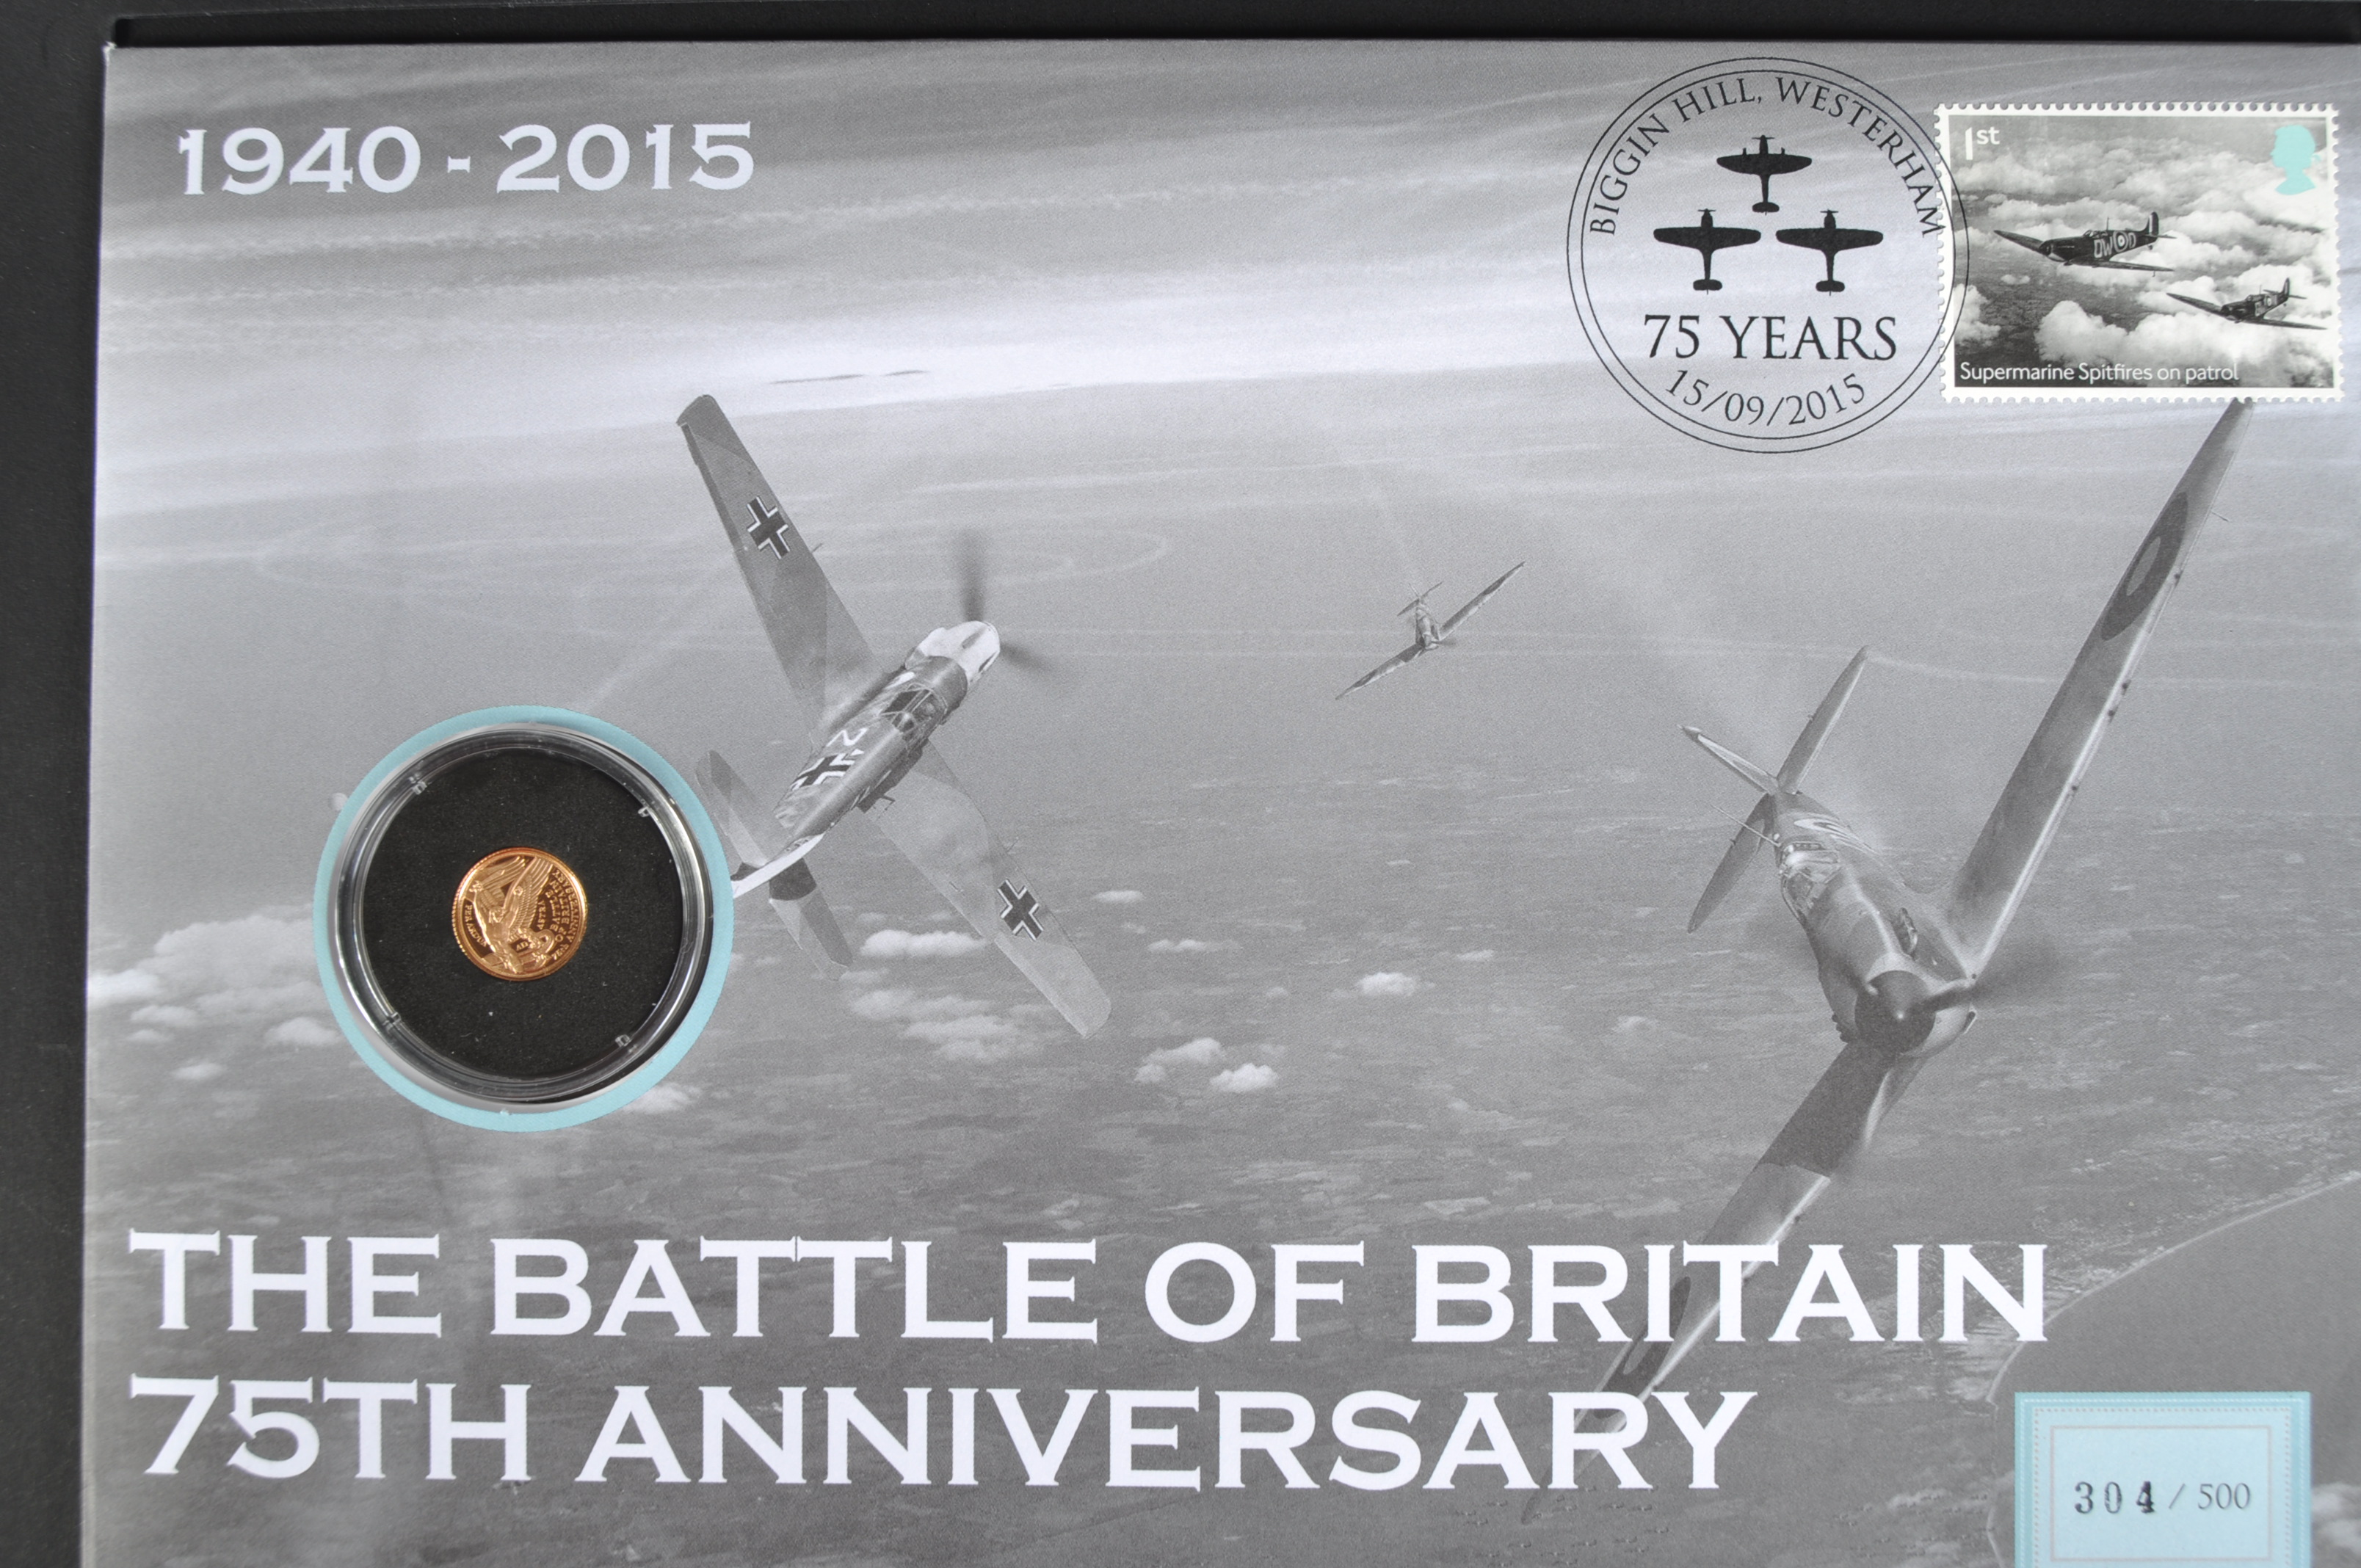 COINS / STAMPS - BATTLE OF BRITAIN 75TH ANNIVERSARY SOVEREIGN COVER - Image 4 of 5